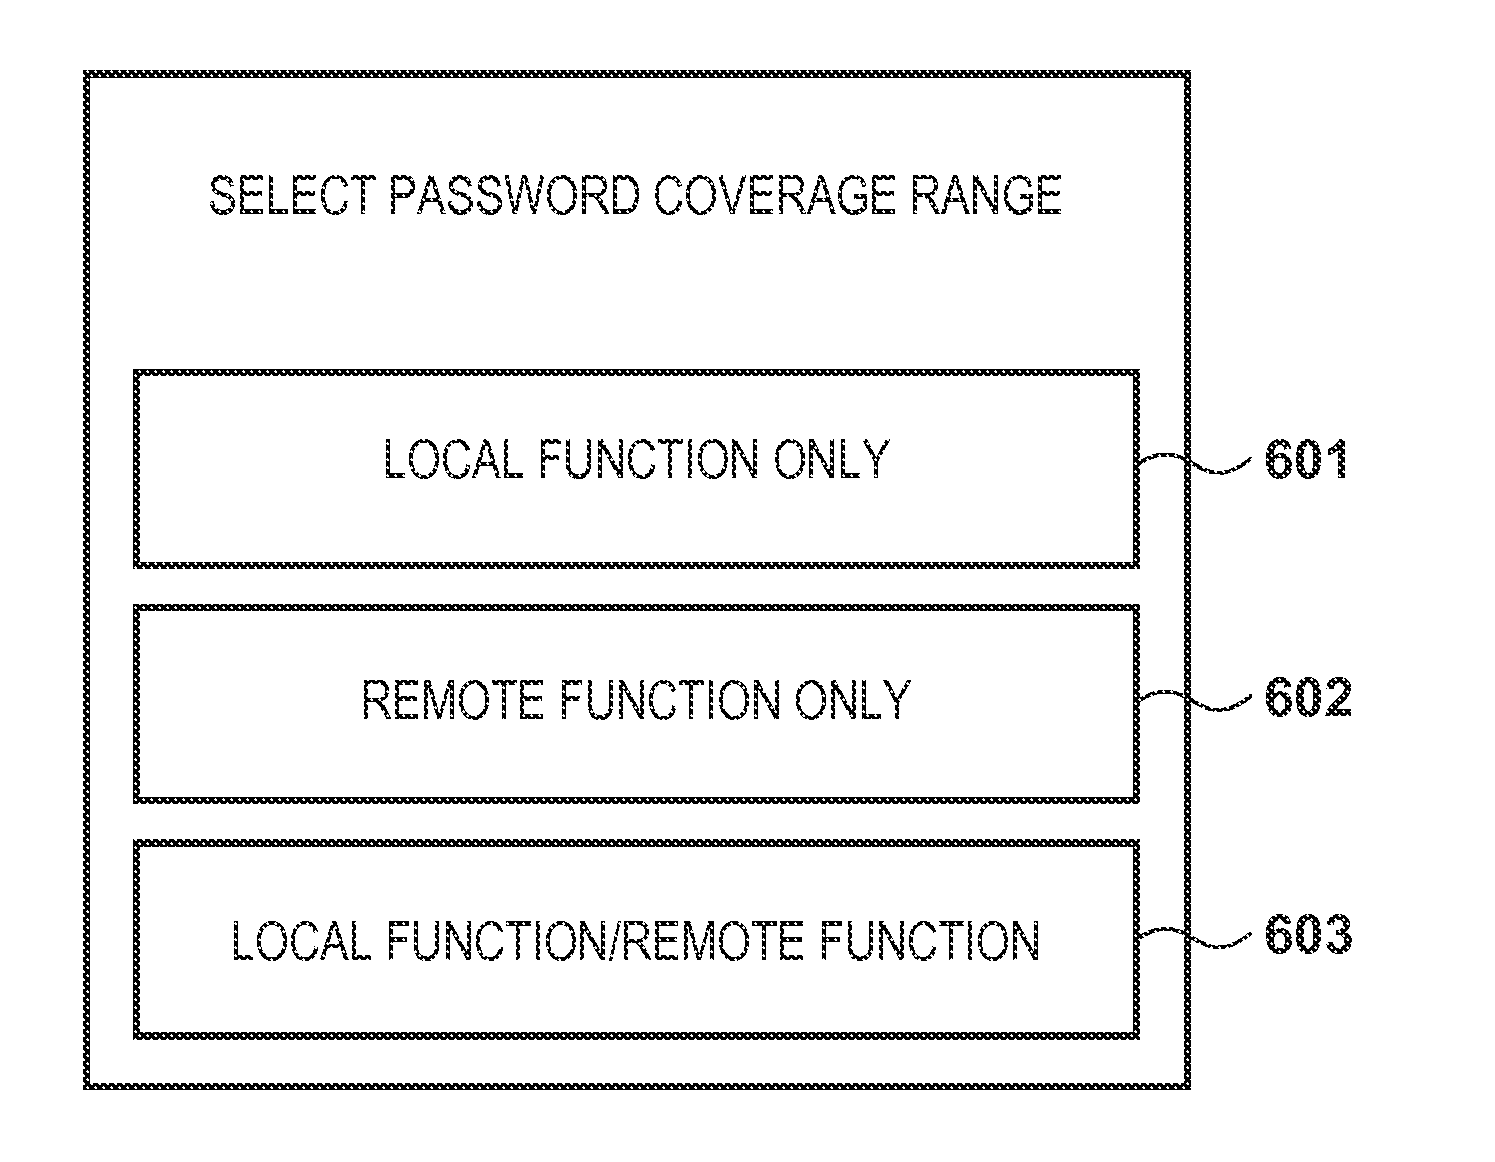 Processing apparatus, method for controlling processing apparatus, and  non-transitory computer-readable storage medium